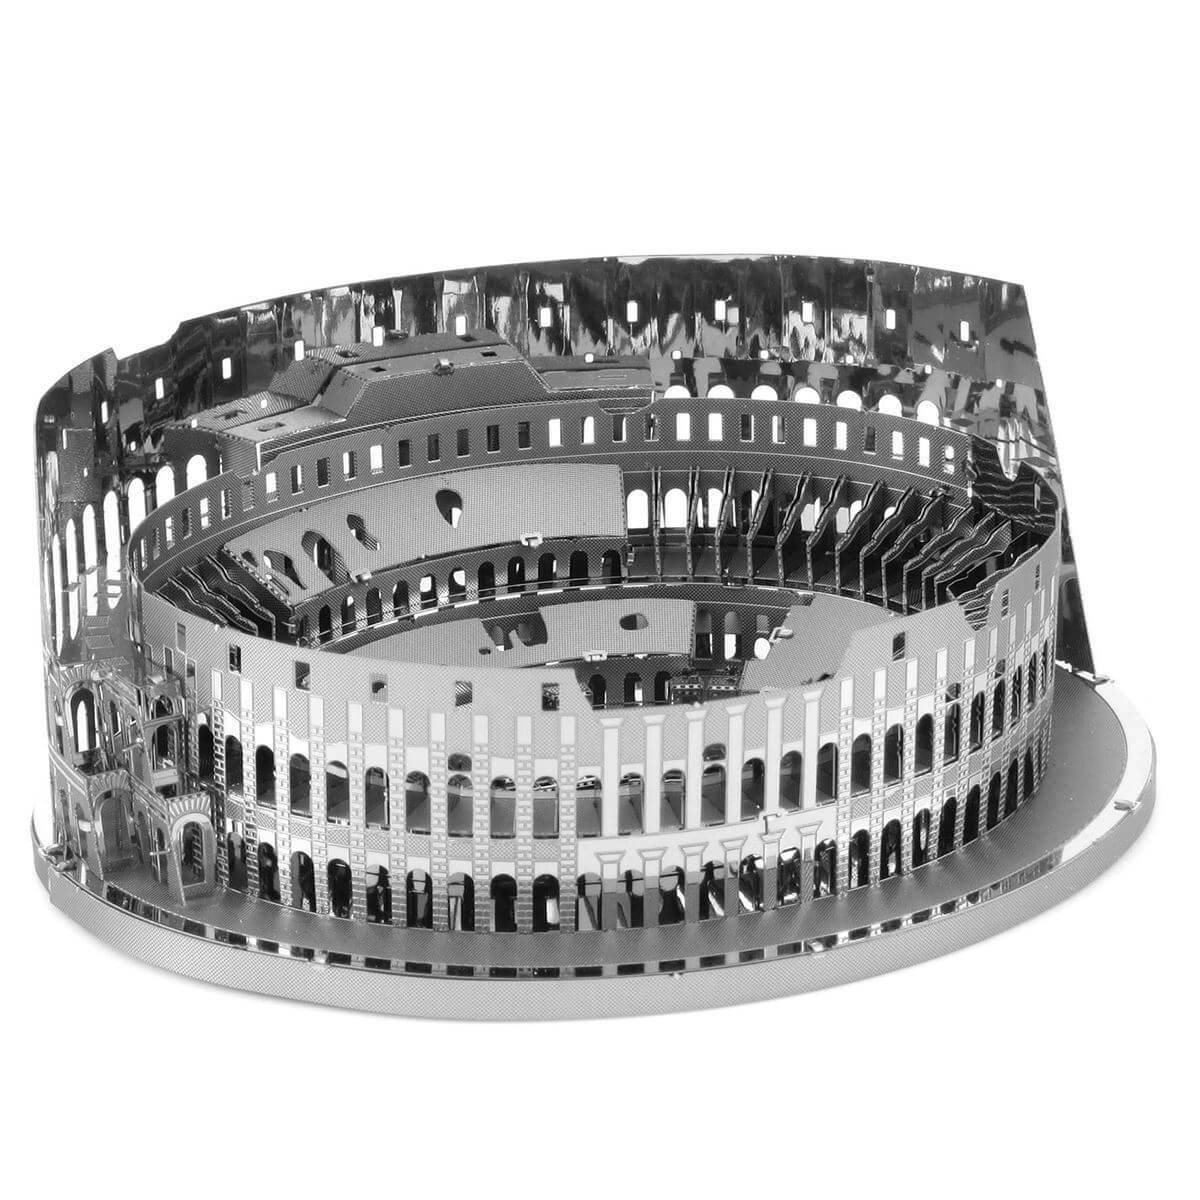 Front view of the completed metal colosseum.